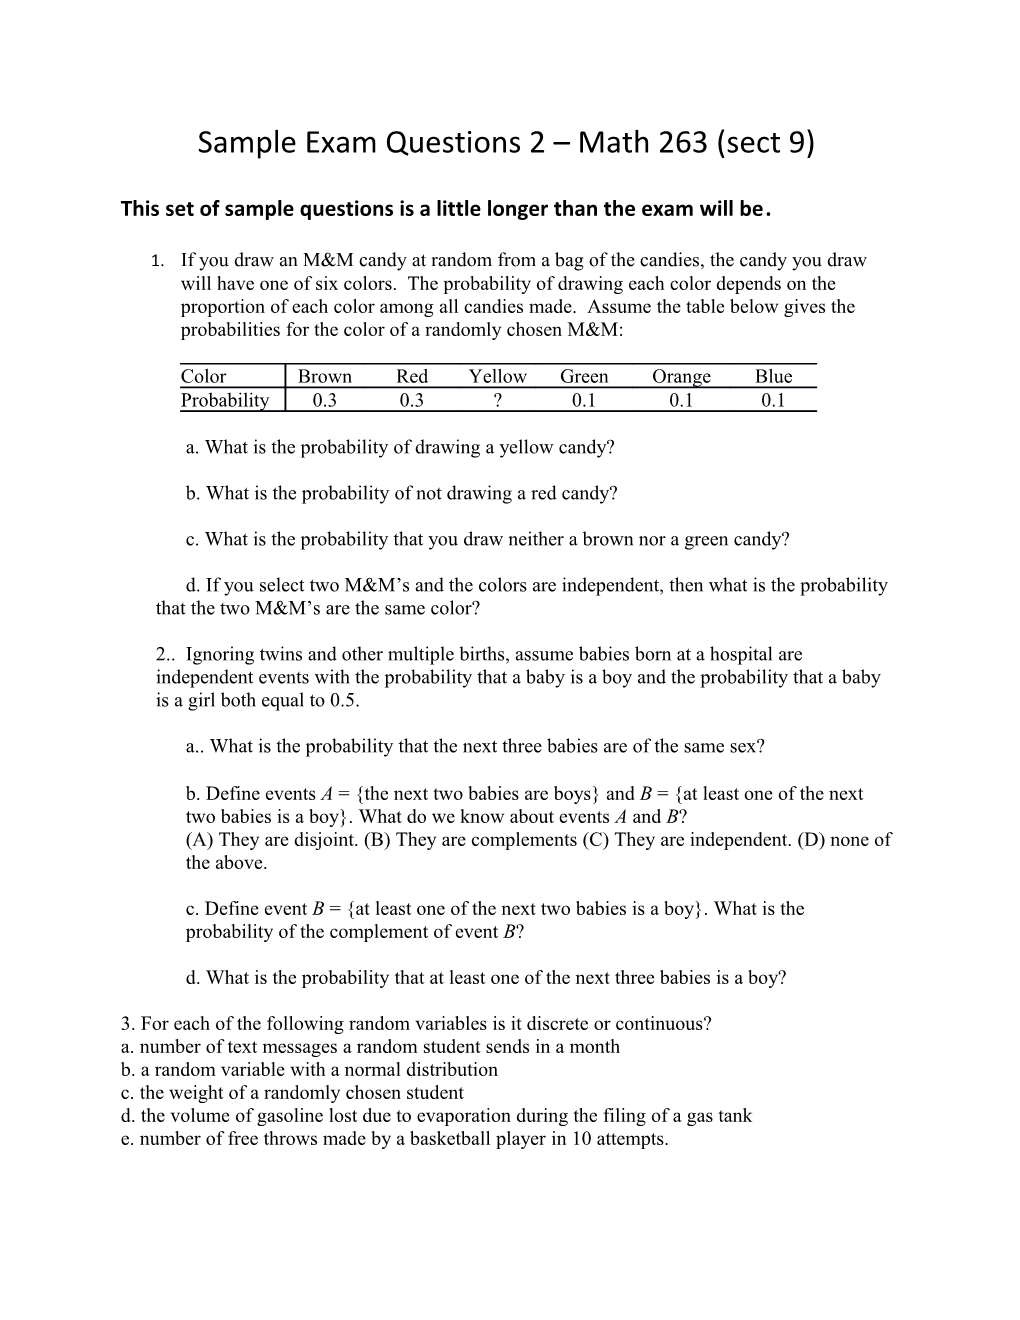 Sample Exam Questions 2 Math 263 (Sect 9)